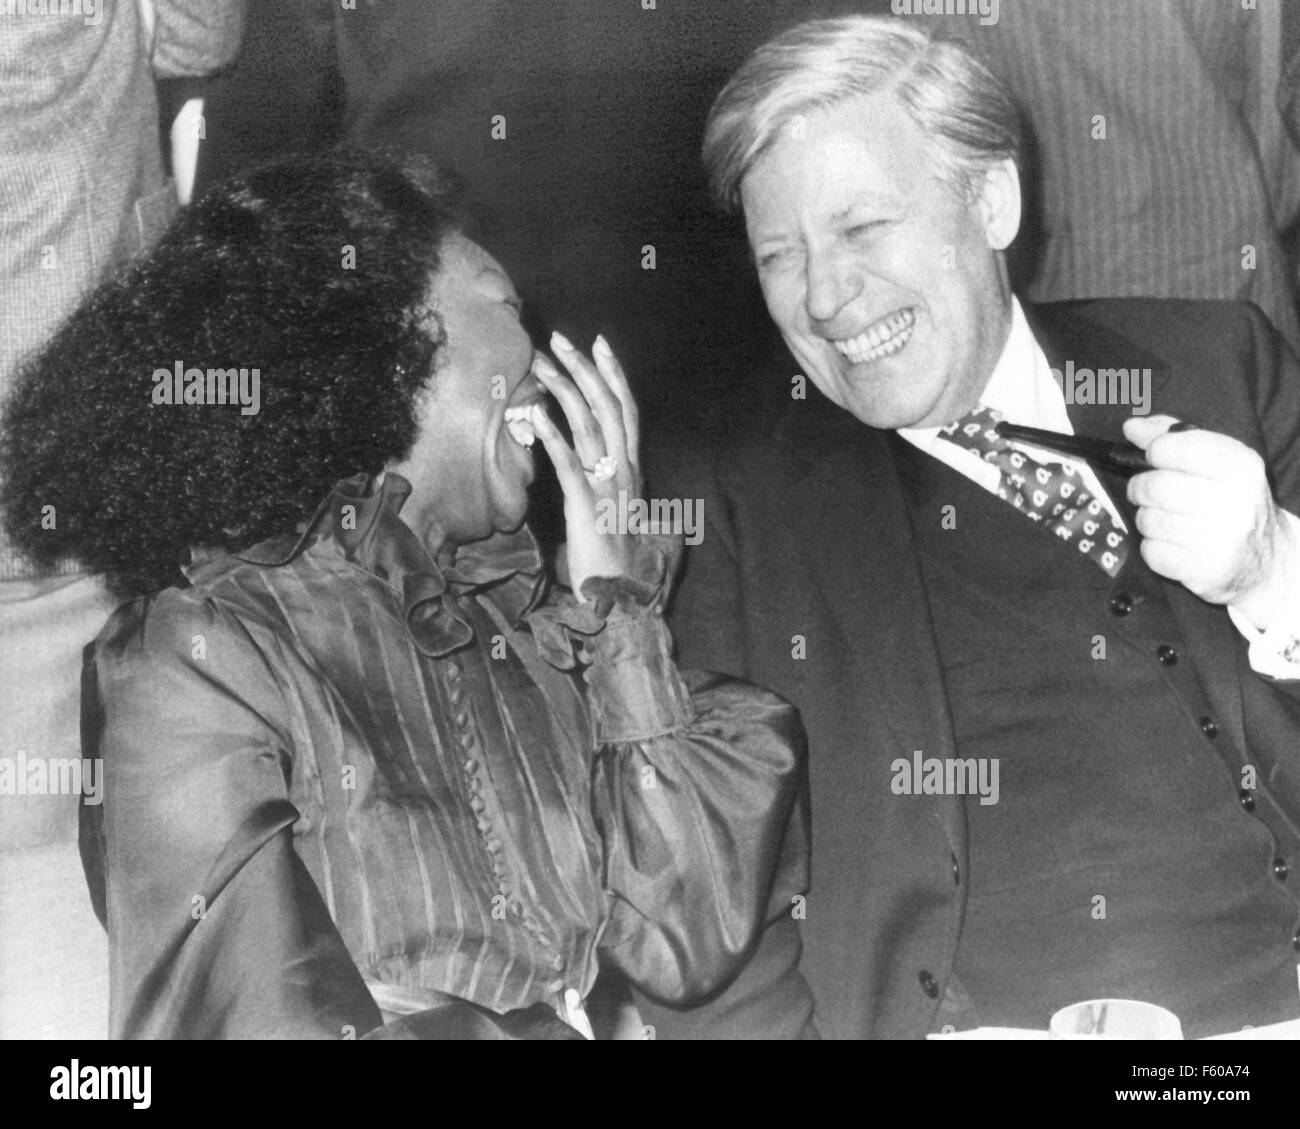 US singer Felicia Weathers and German Chancellor Helmut Schmidt are laughing during a jazz festival on 7 November 1980 at the Berlin Philharmonic. Stock Photo